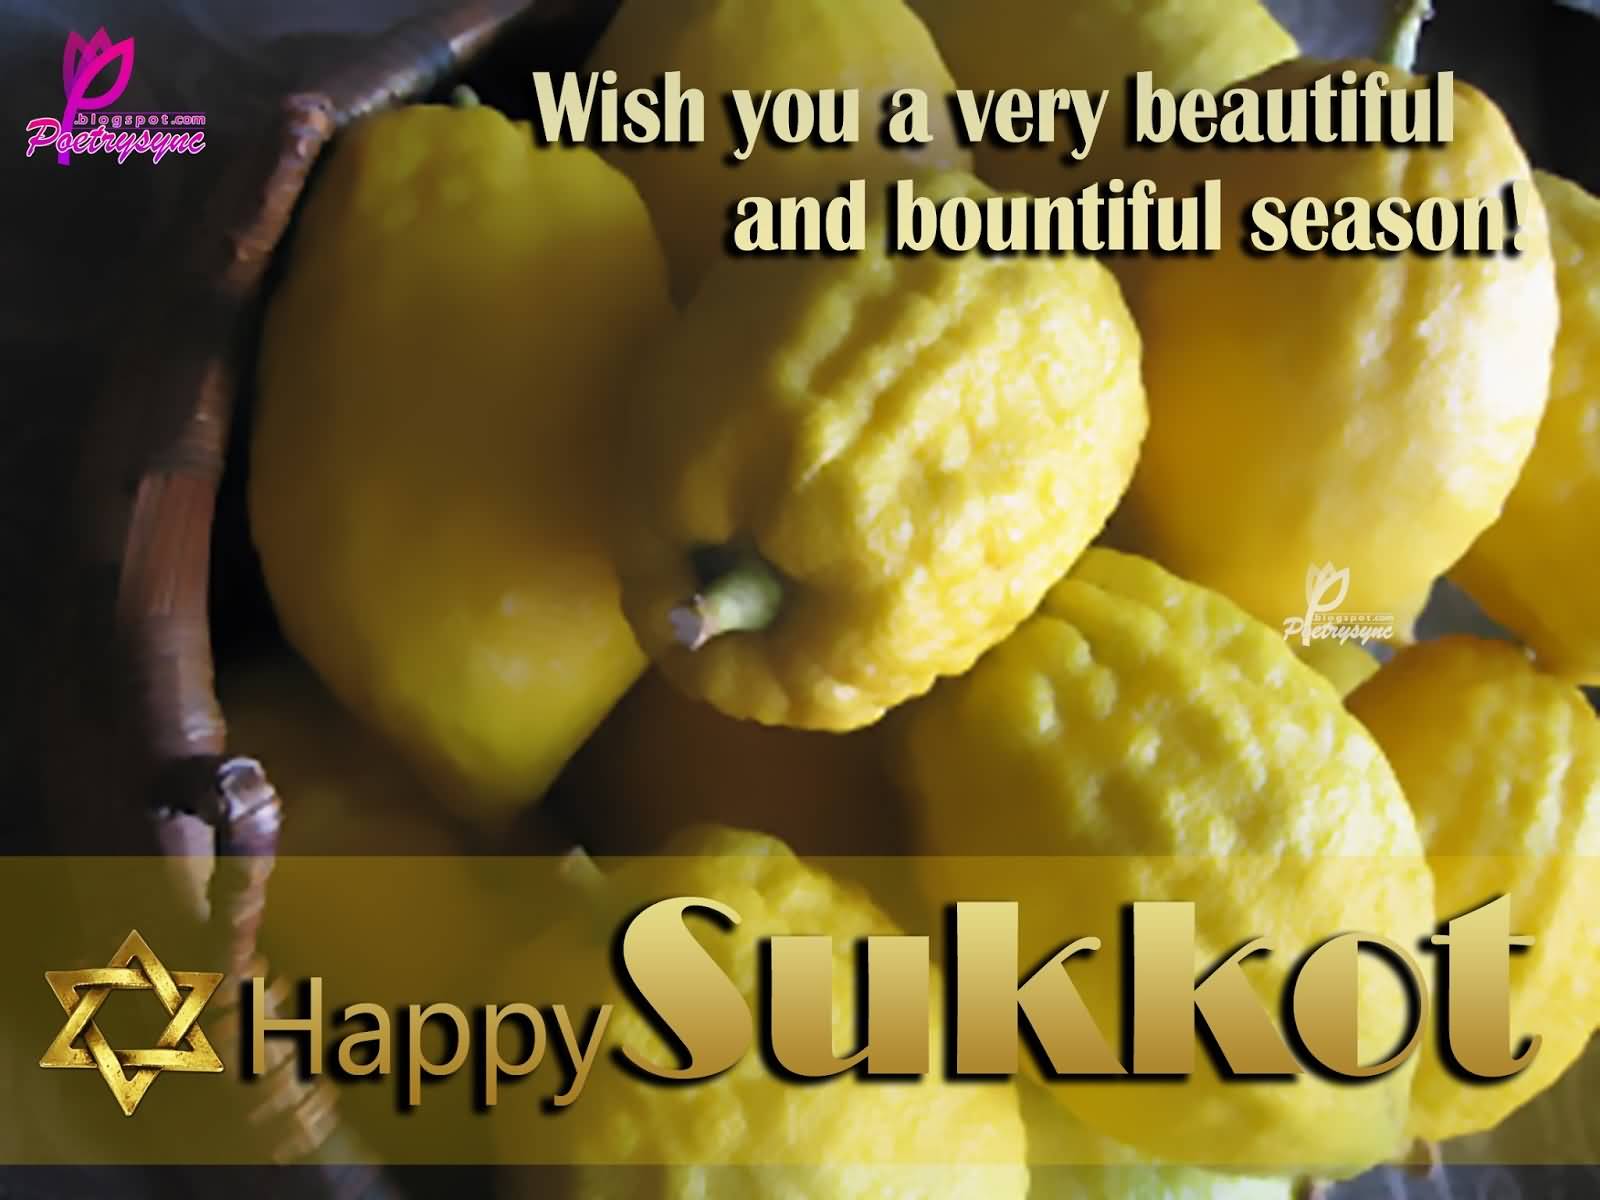 Best Pictures And Image Of Happy Sukkot Greetings